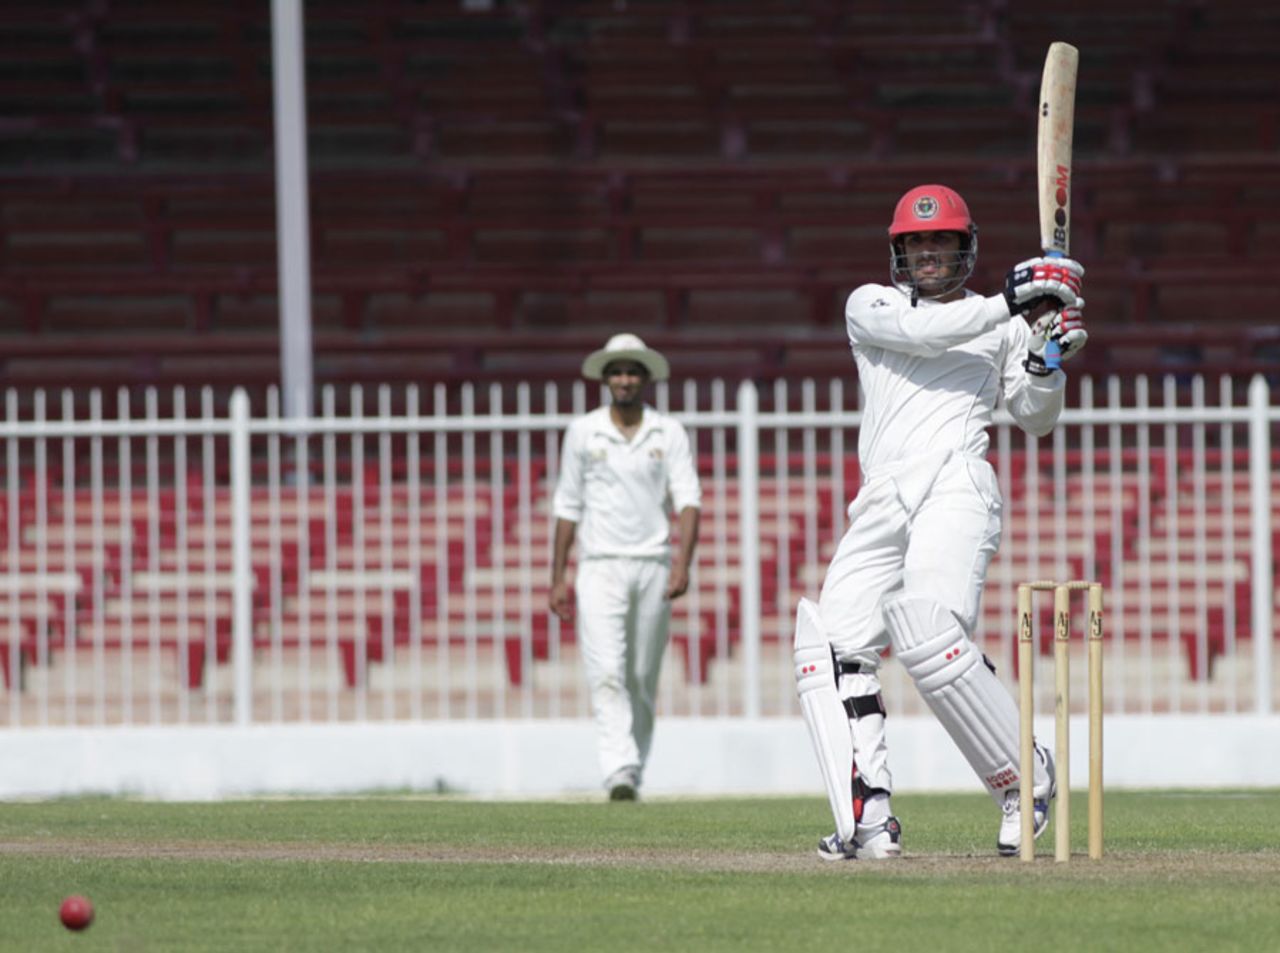 Mohammad Nabi helped Afghanistan secure a draw with an unbeaten 35, UAE v Afghanistan, Intercontinental Cup, Sharjah, 2nd day, October 6 2011